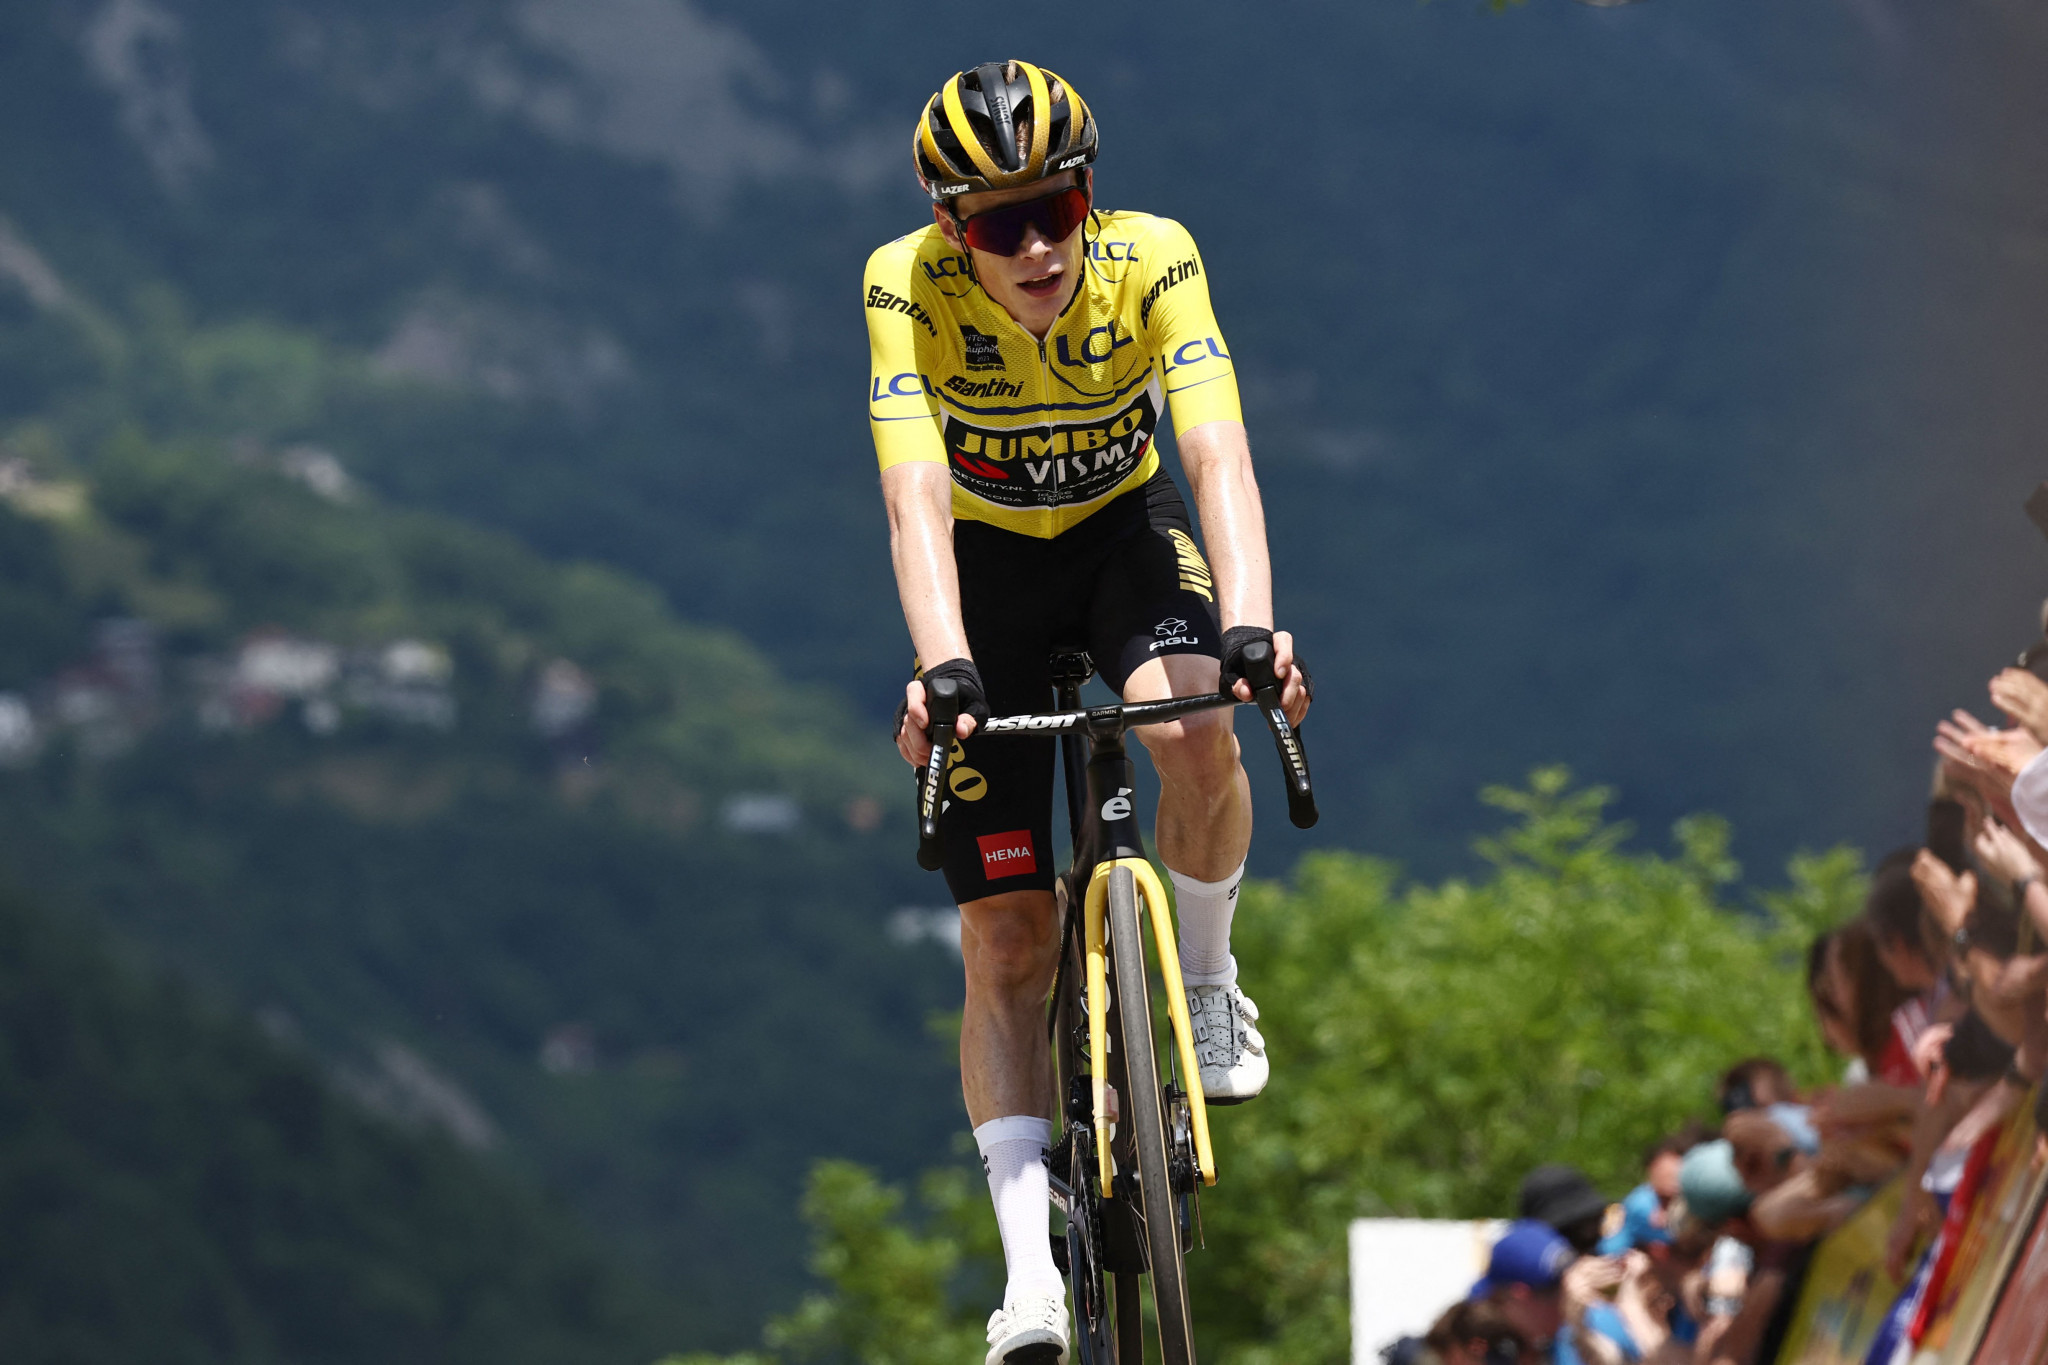 Jonas Vingegaard finished second in today's final 153km stage that finished in La Bastille behind Italy's Giulio Ciccone, who clinched the prize for top climber ©Getty Images